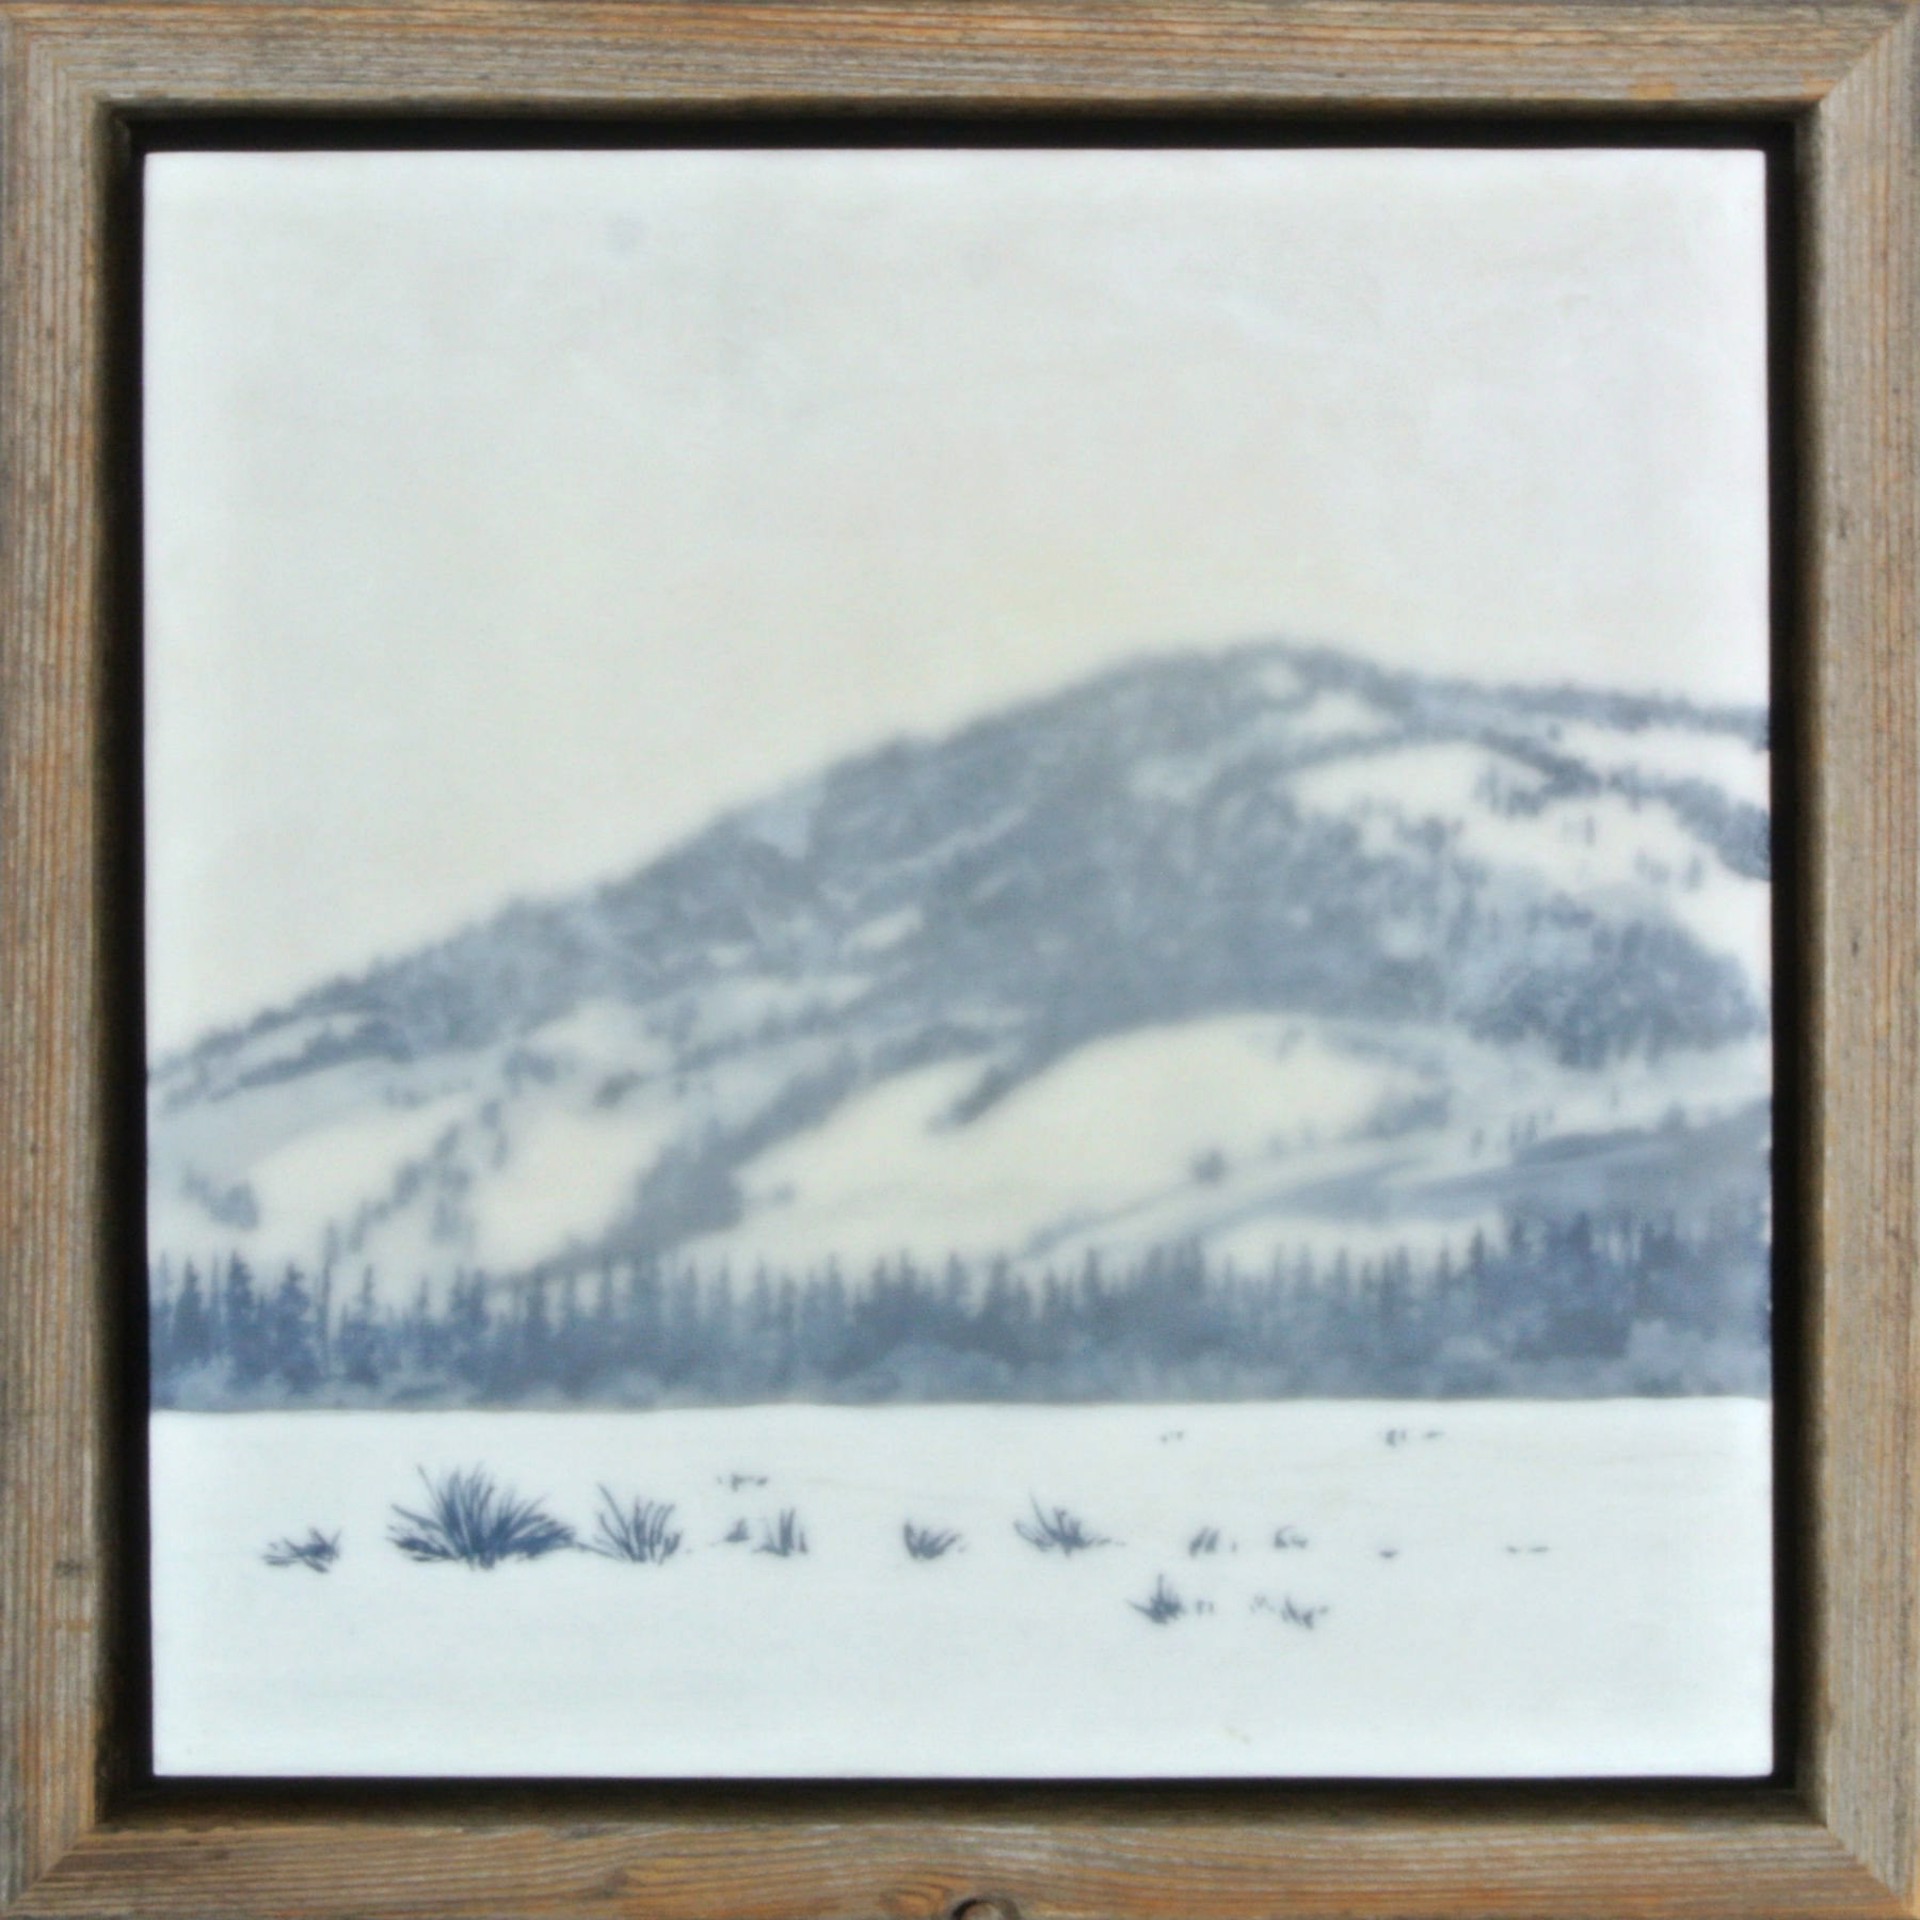 A Soft Encaustic Painting By Bridgette Meinhold Featuring A Snowy Mountain Landscape With Mountains And Sagebrush, Available At Gallery Wild